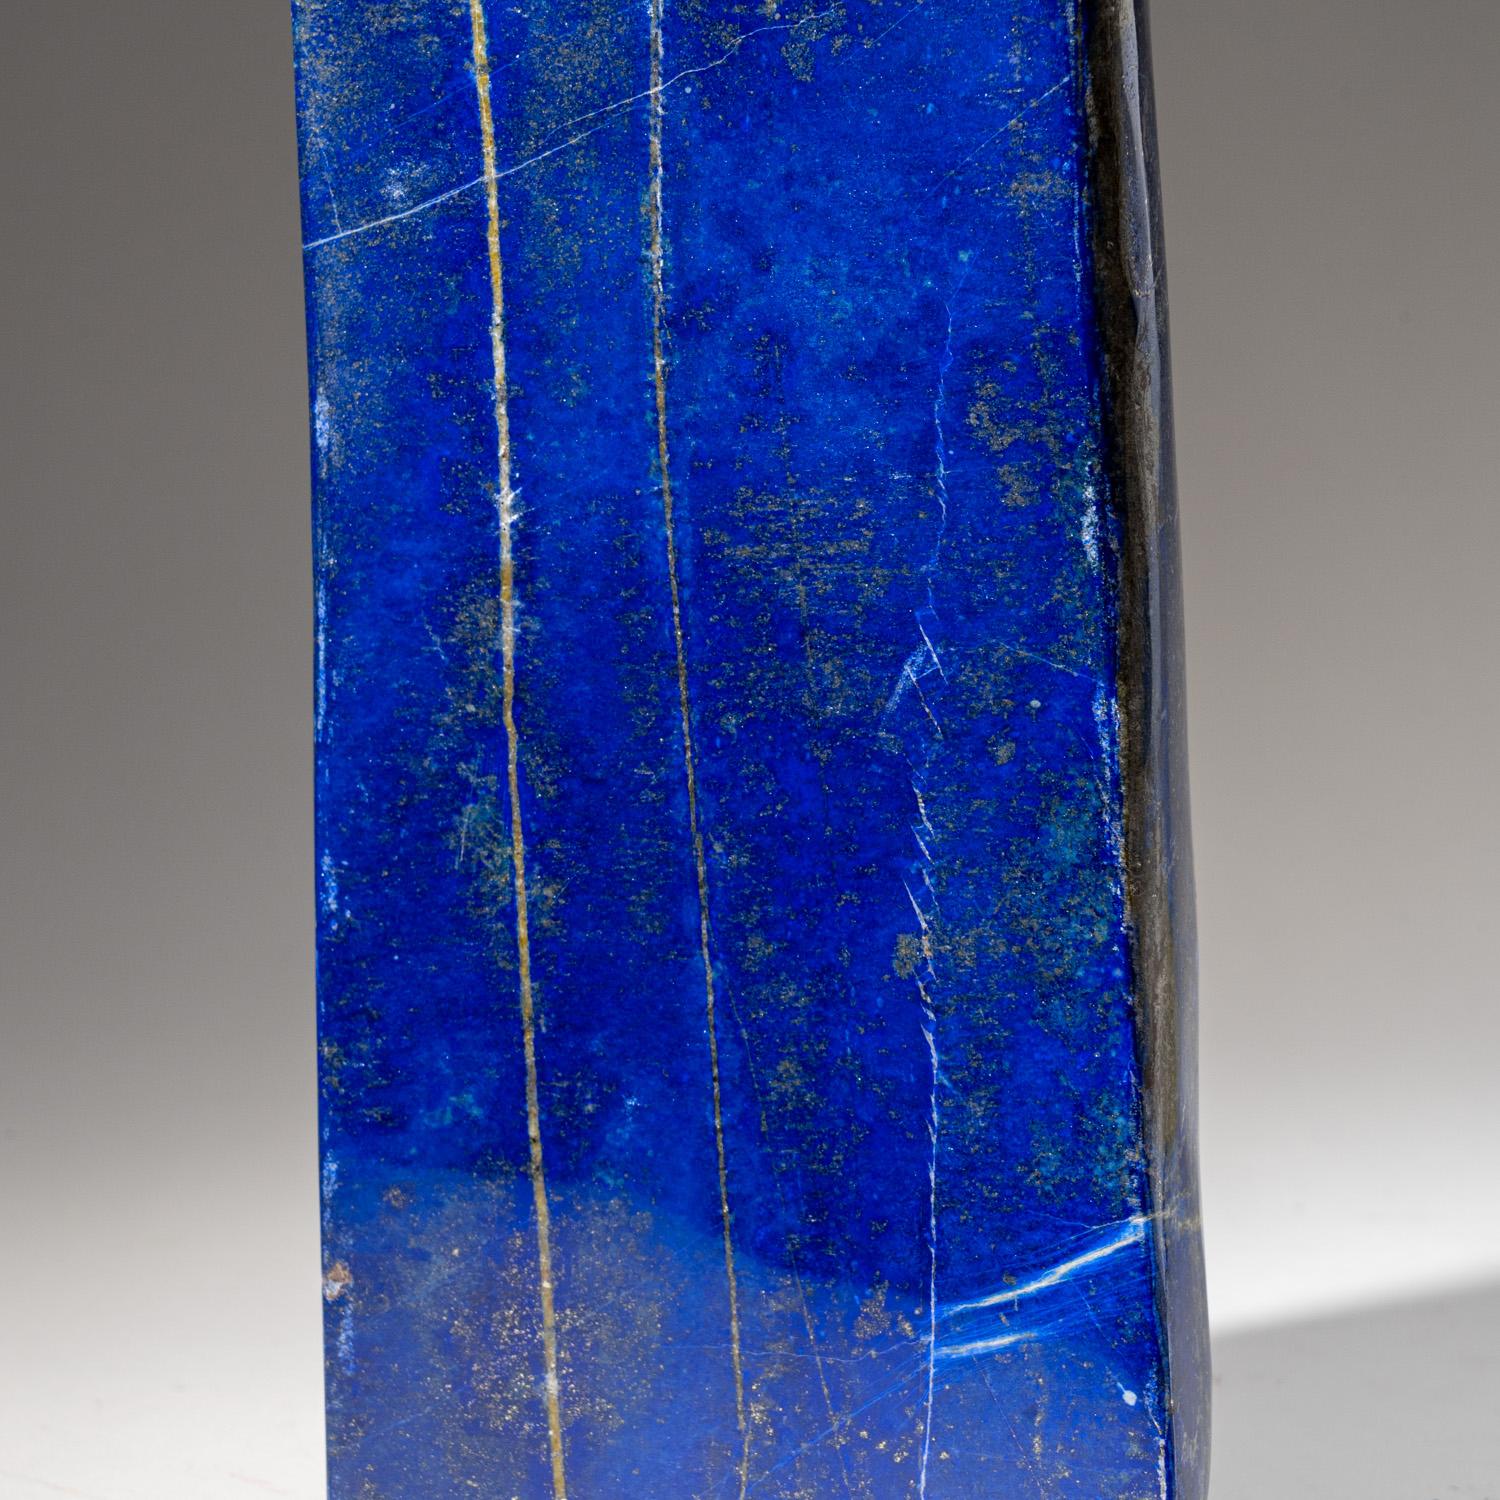 Contemporary Polished Lapis Lazuli Freeform from Afghanistan (9.7 lbs) For Sale